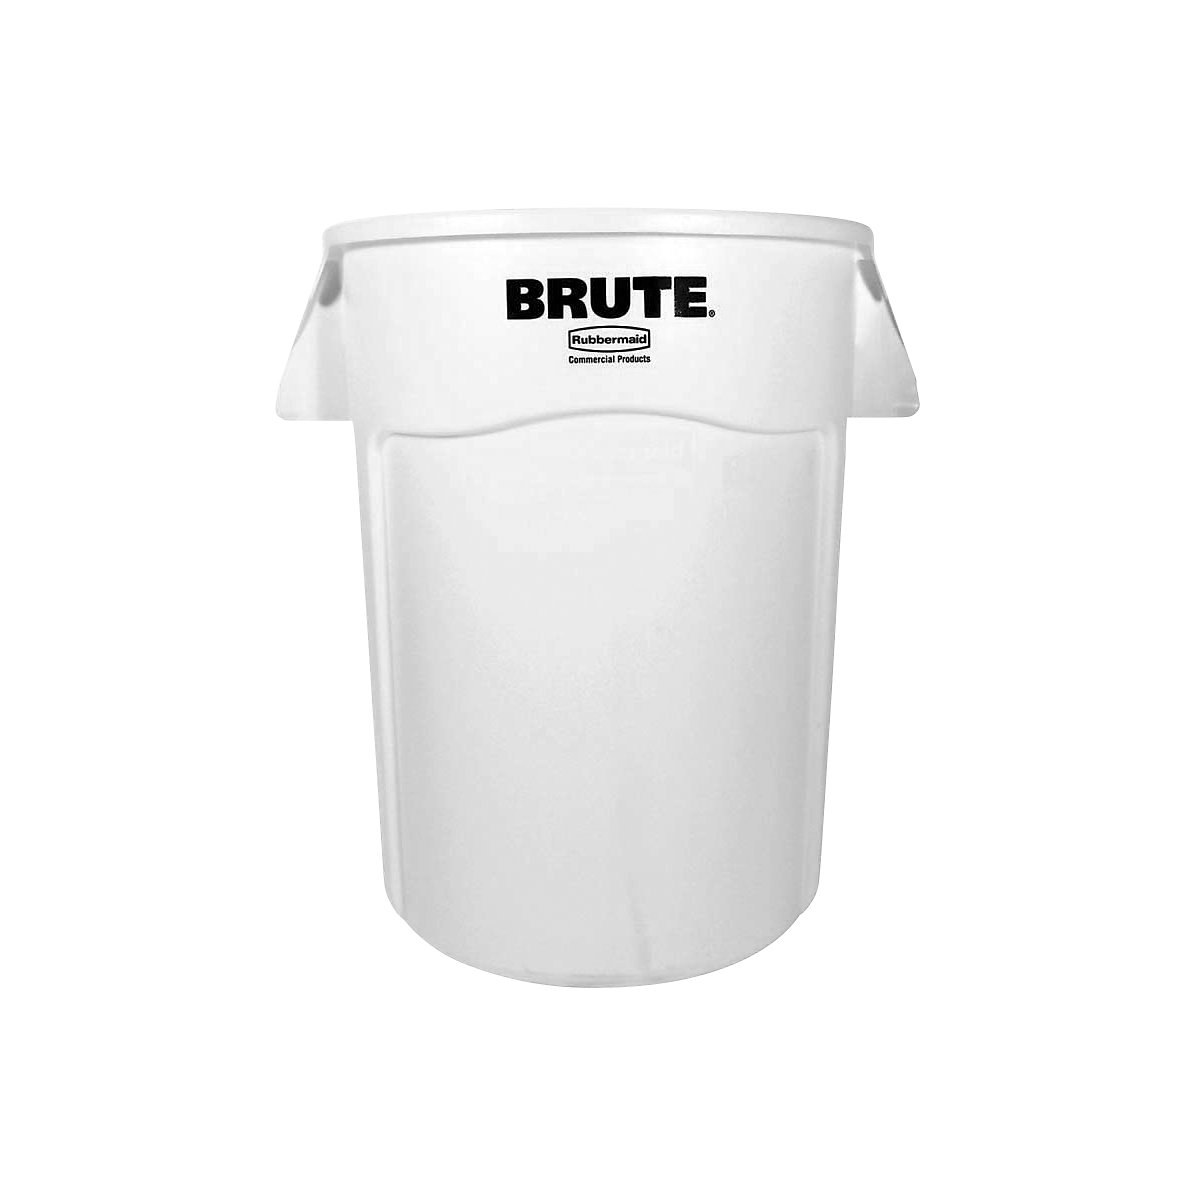 Rubbermaid – BRUTE® universal container/multi purpose container, round, capacity approx. 166 l, white